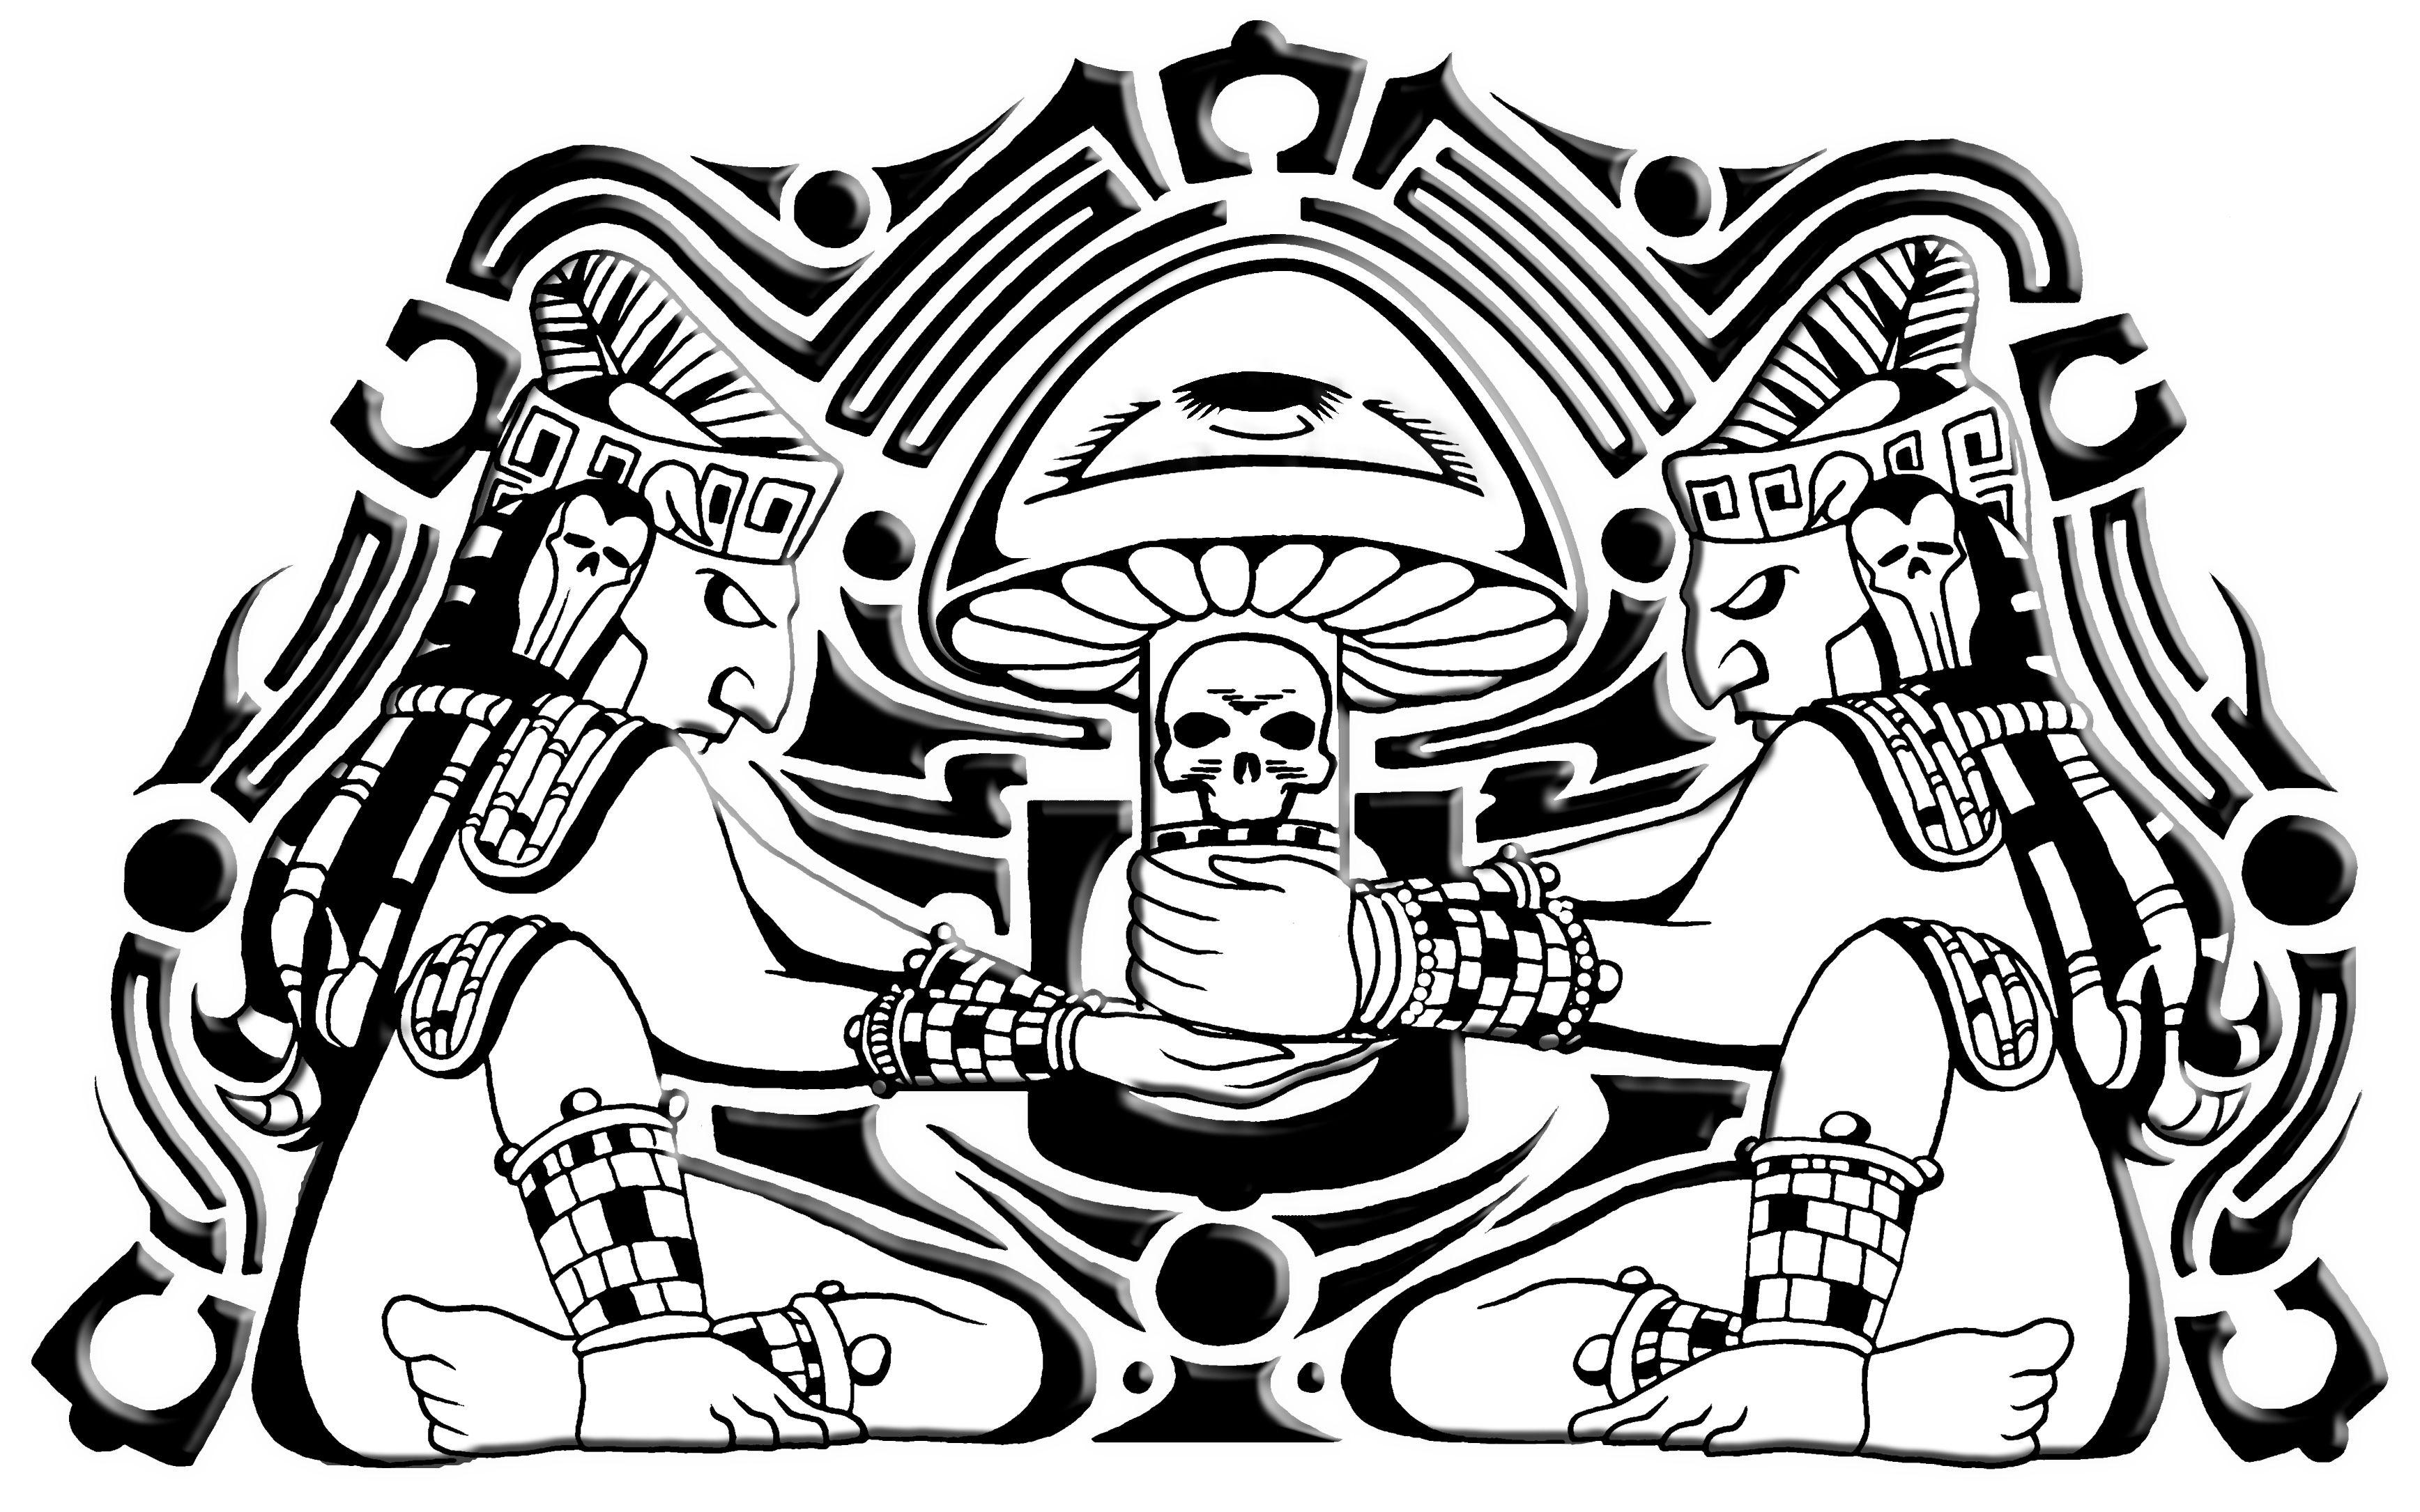 Free Aztec Art coloring pages Download and print Aztec Art coloring pages